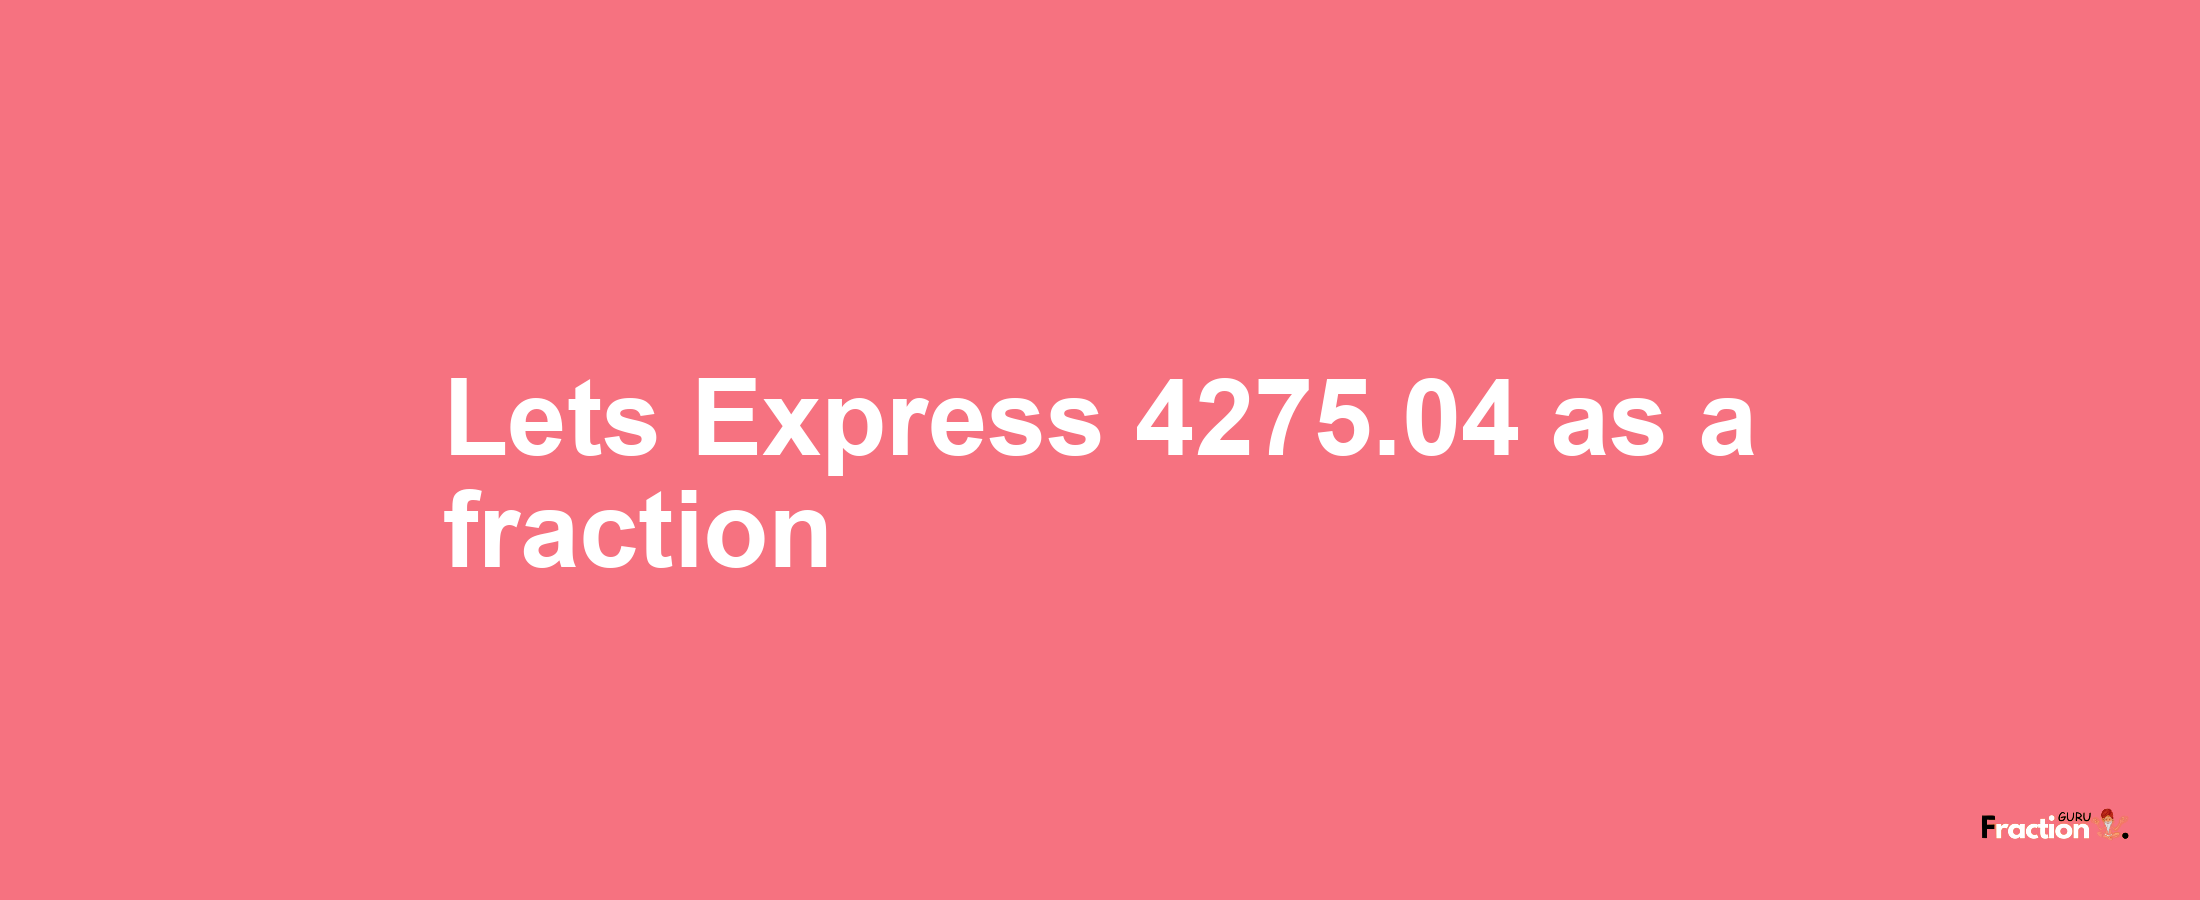 Lets Express 4275.04 as afraction